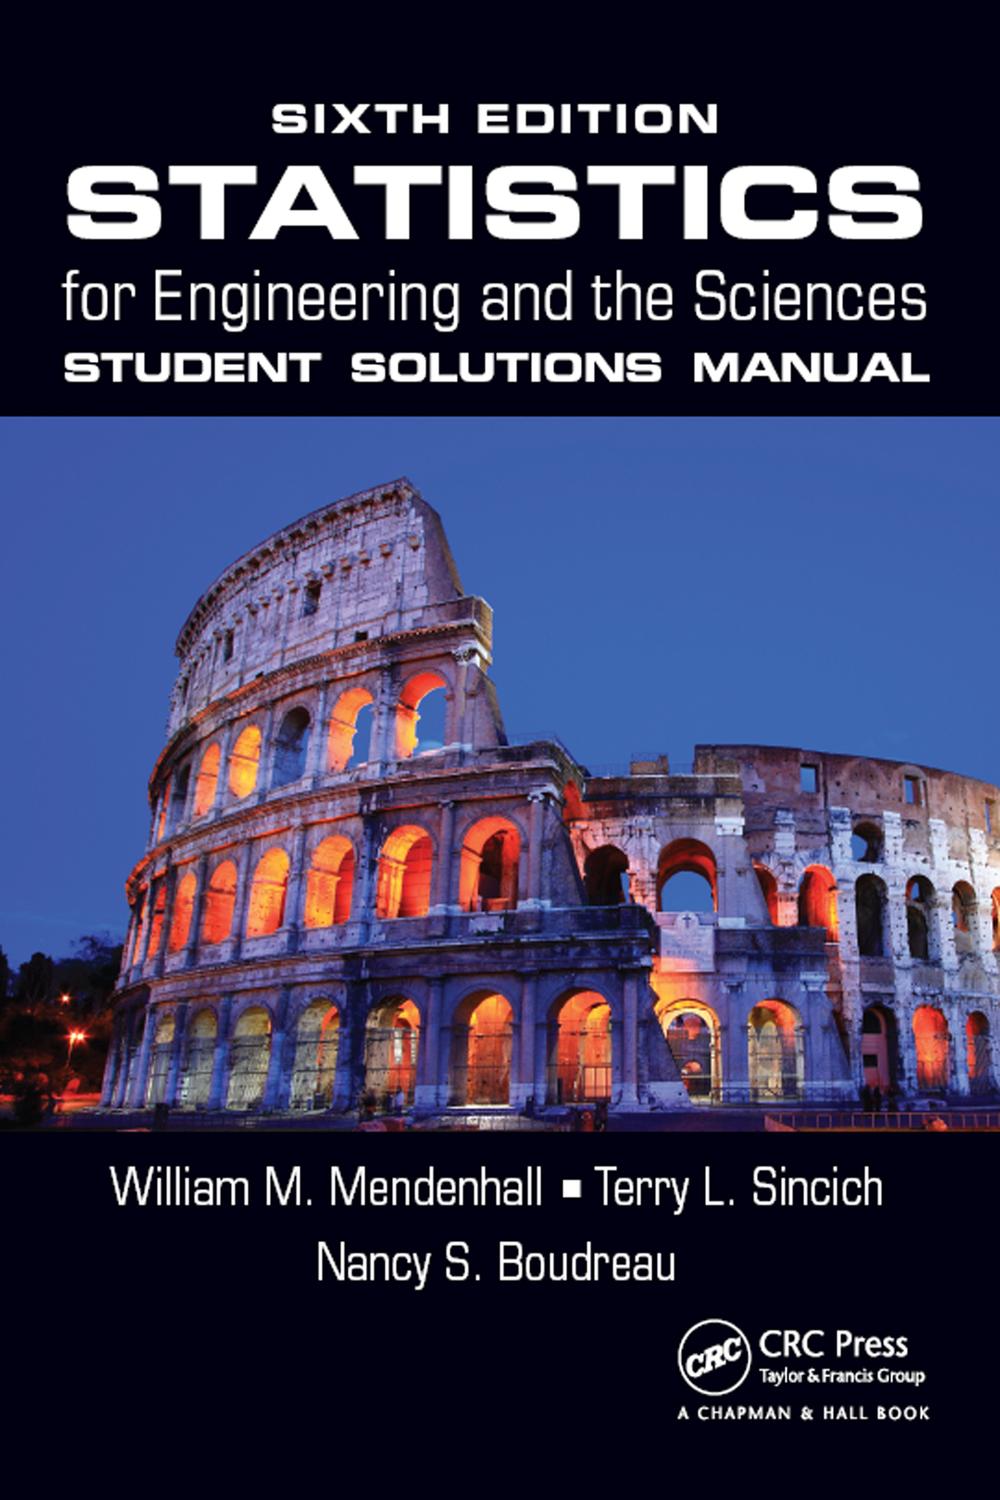 Statistics for Engineering and the Sciences Student Solutions Manual - William M. Mendenhall, Terry L. Sincich, Nancy S. Boudreau